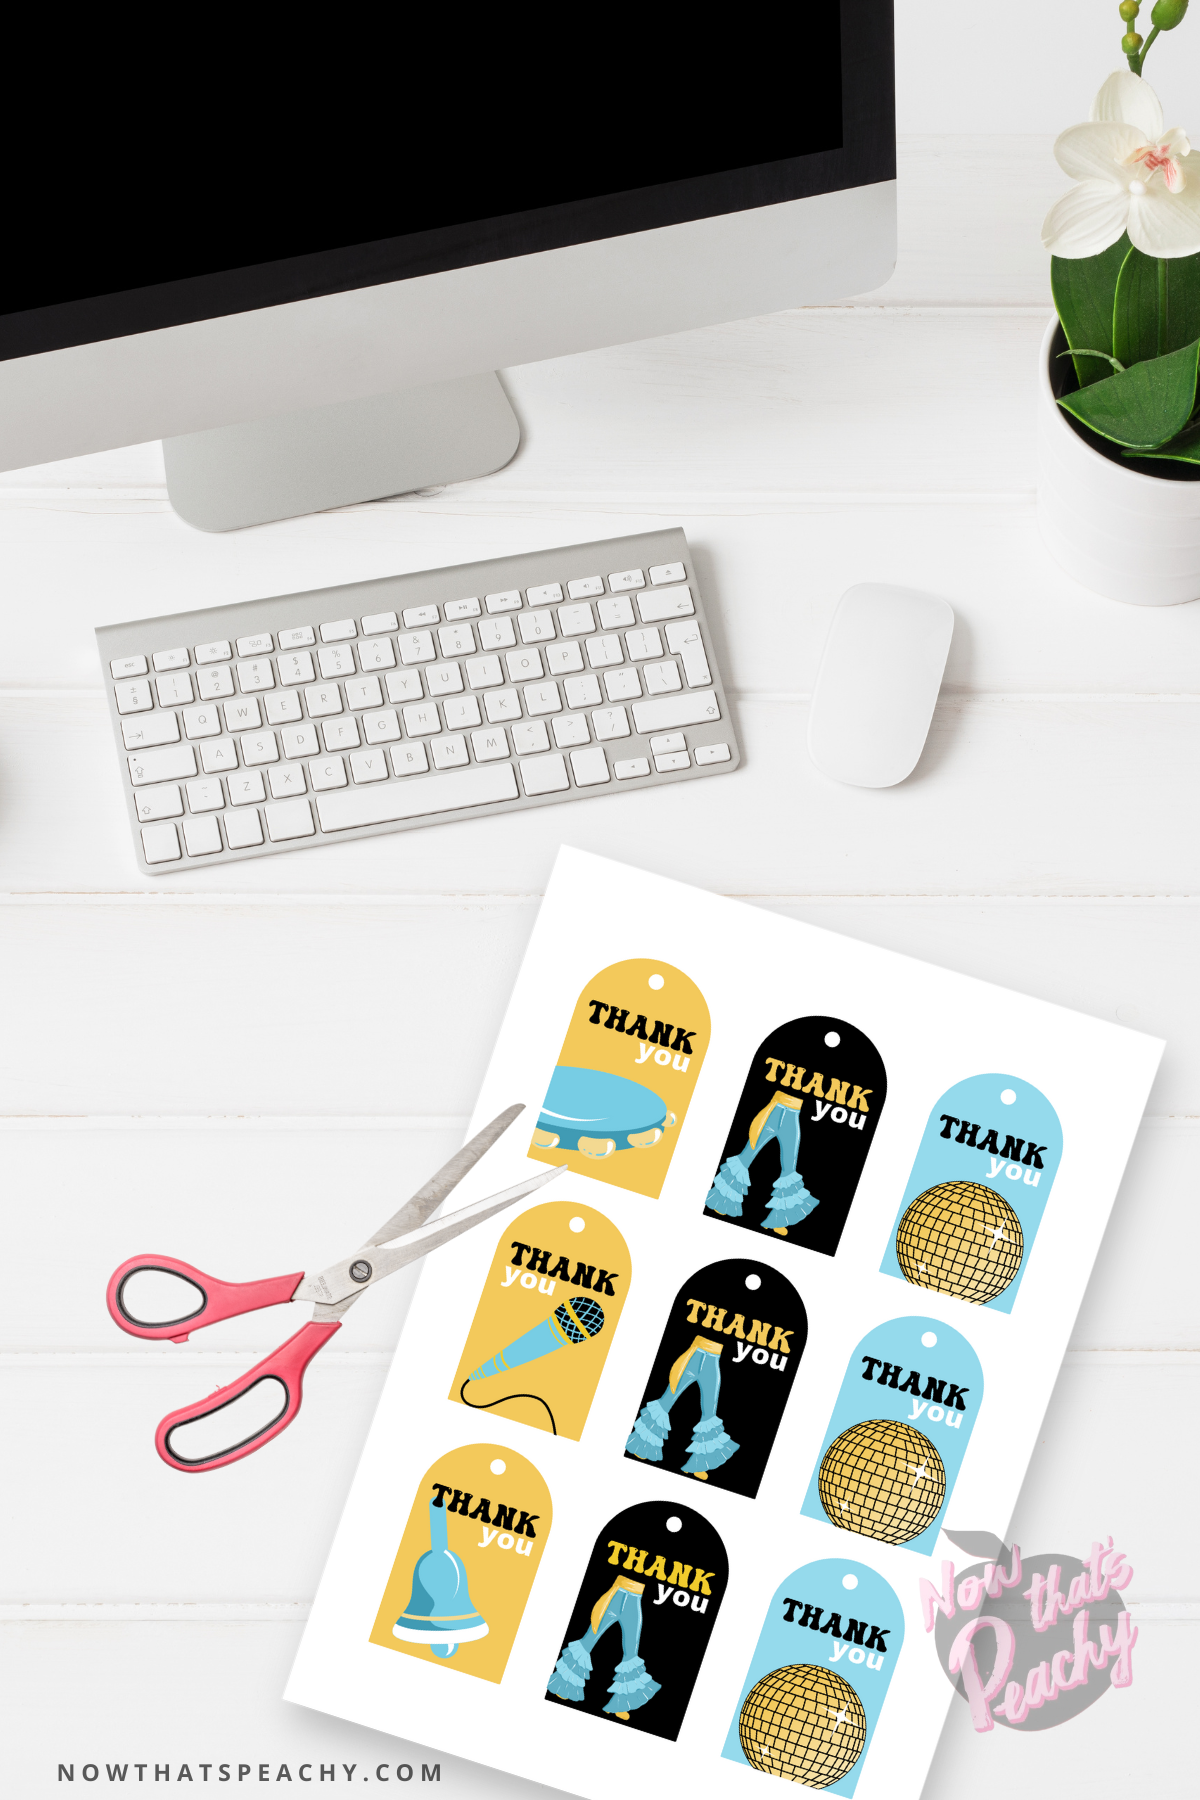 Mamma Mia  party thank you swing gift tags print outs1970s seventies 70's disco ball karaoke  printable template digital instant download edit Donna and the dynamos DIY custom musical movie design hand drawn fan art modern color themed bachelorette birthday charity fundraiser event fun 